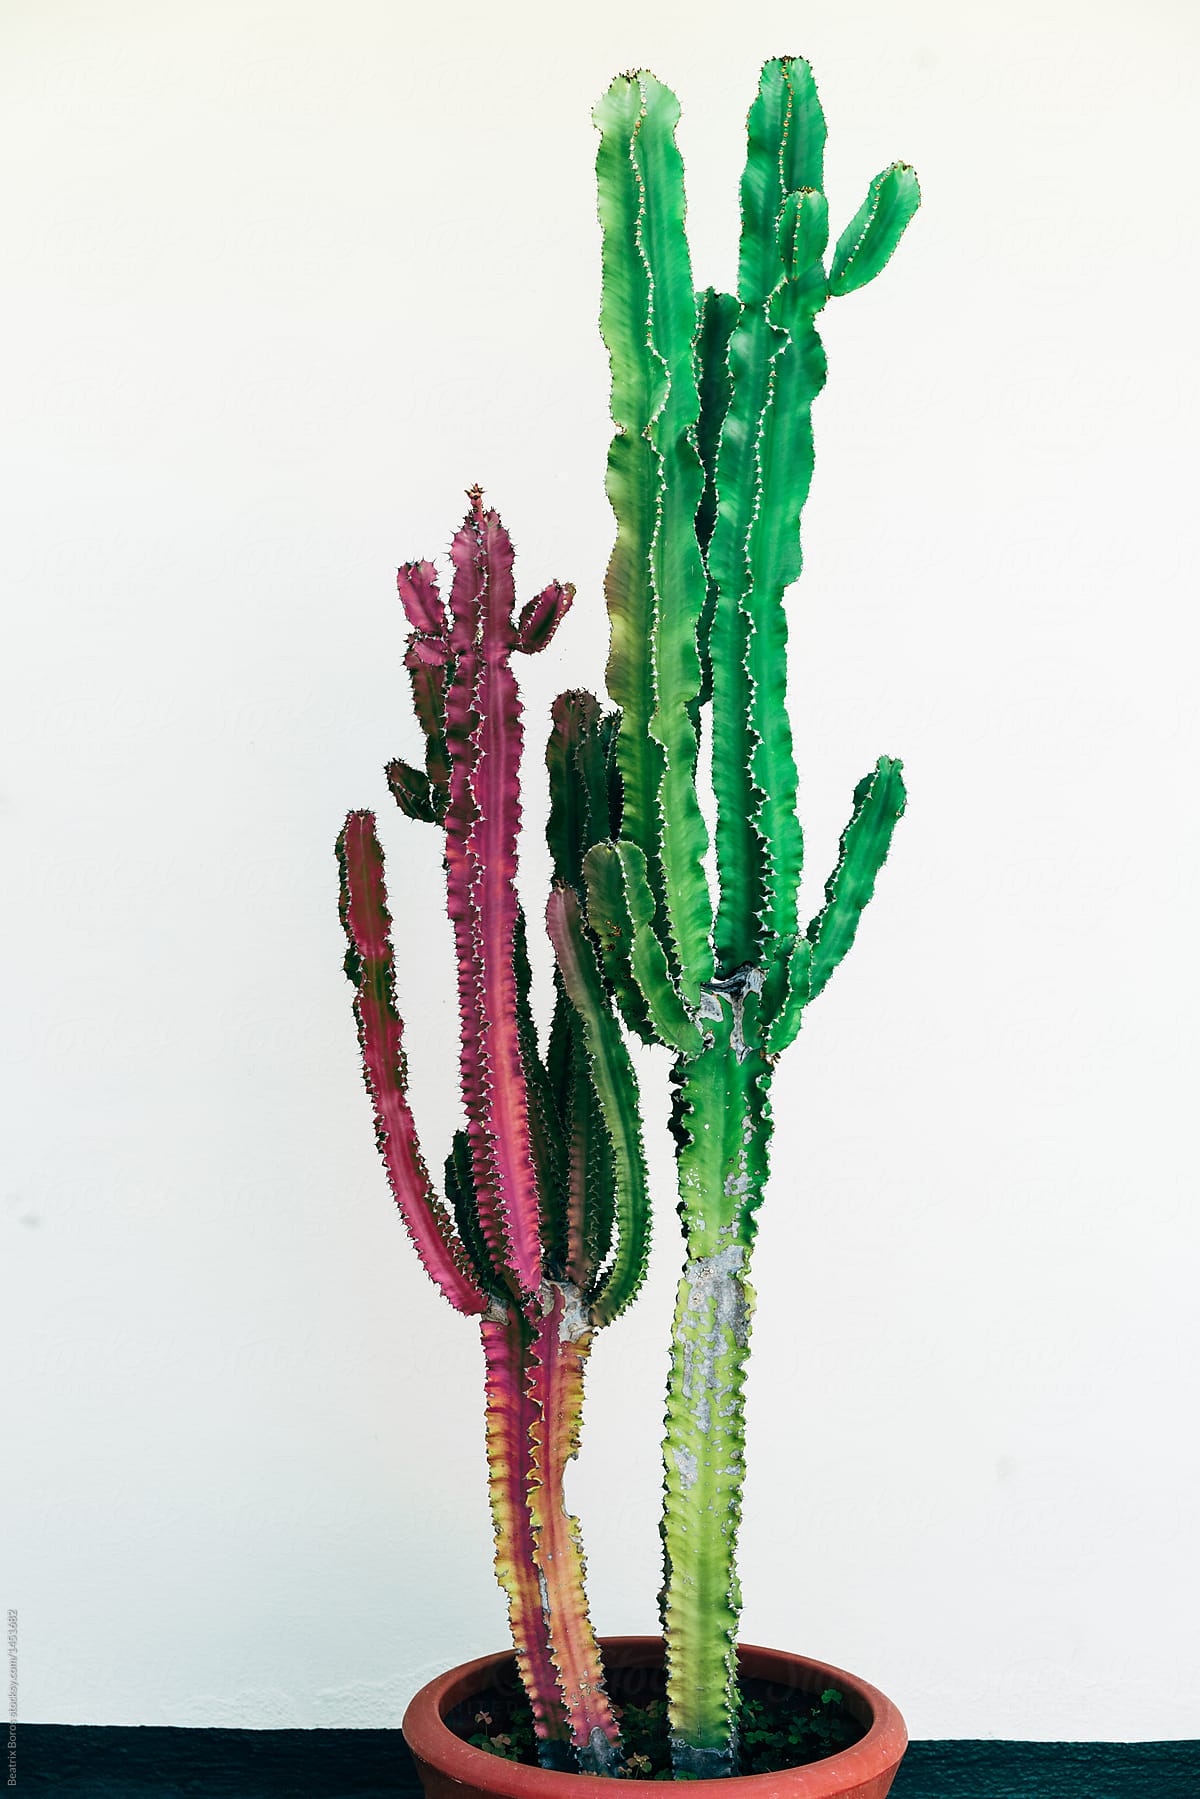 Colorful Cactus laying on the table  Background